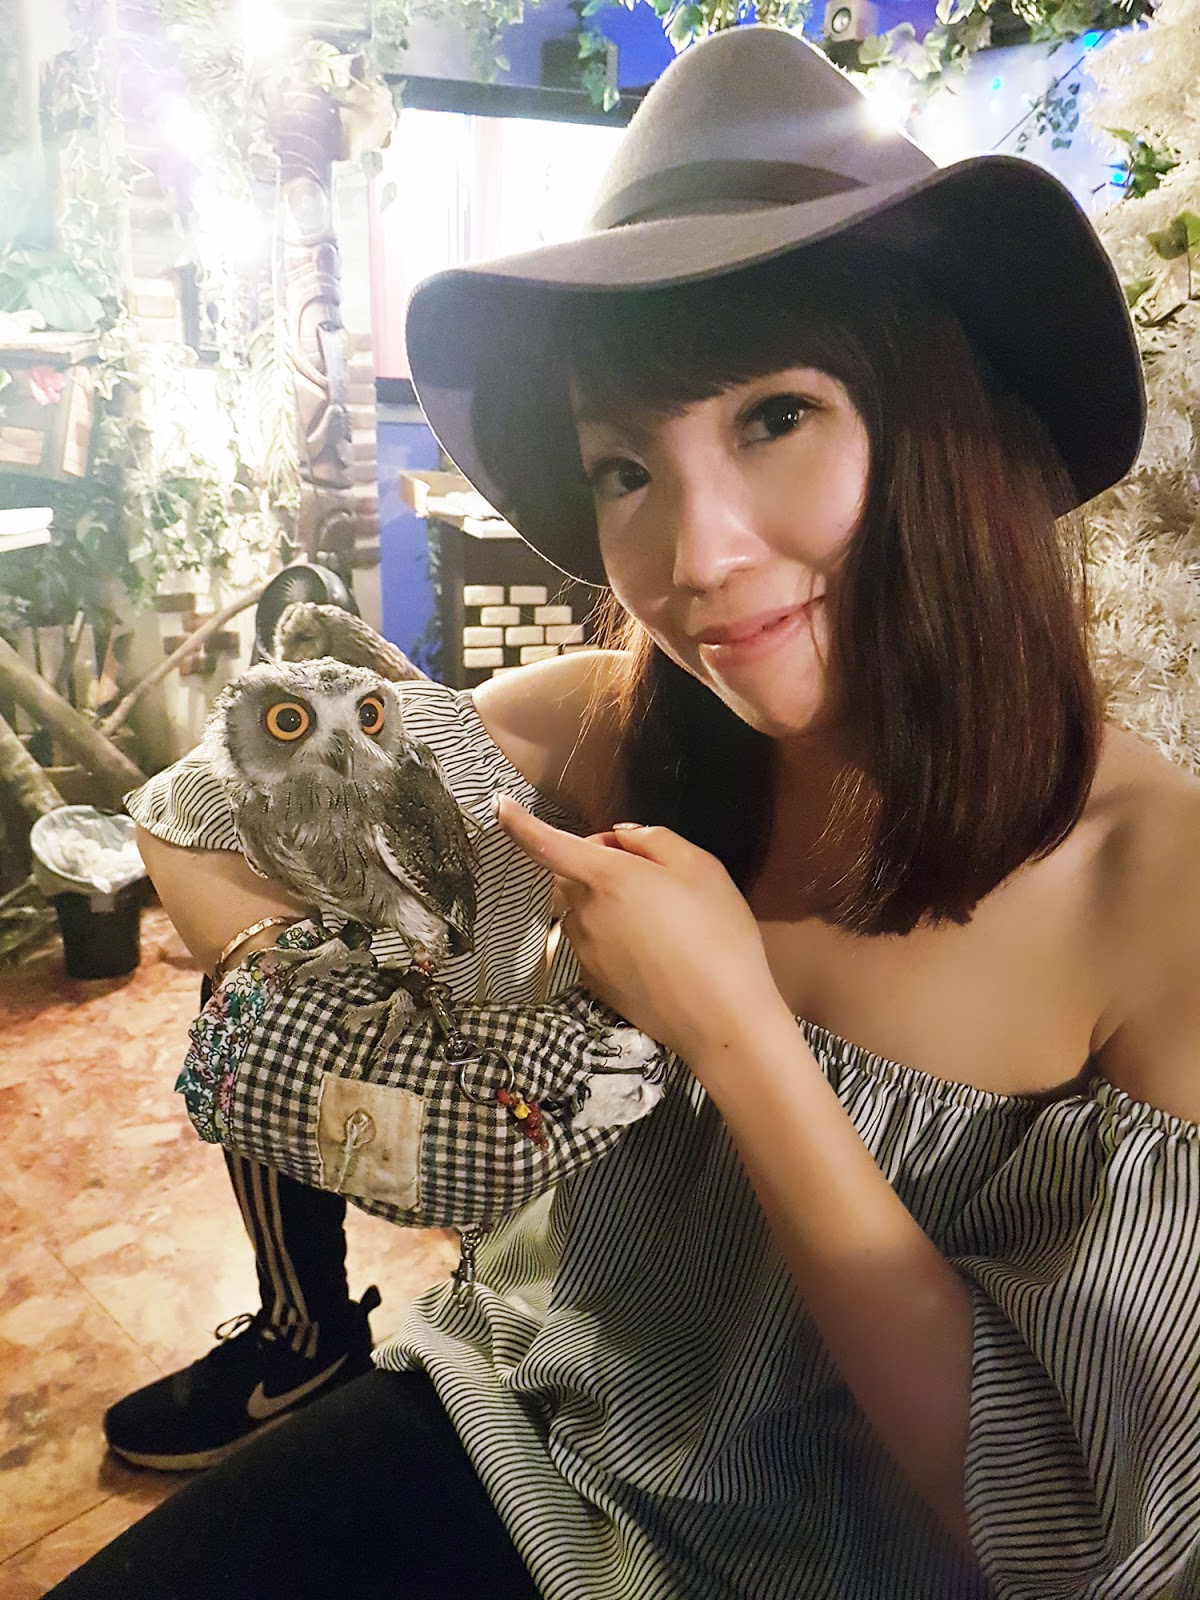 Owl Cafe {Japan Travel} - What it is like to become friends with owls - Every Little Thing